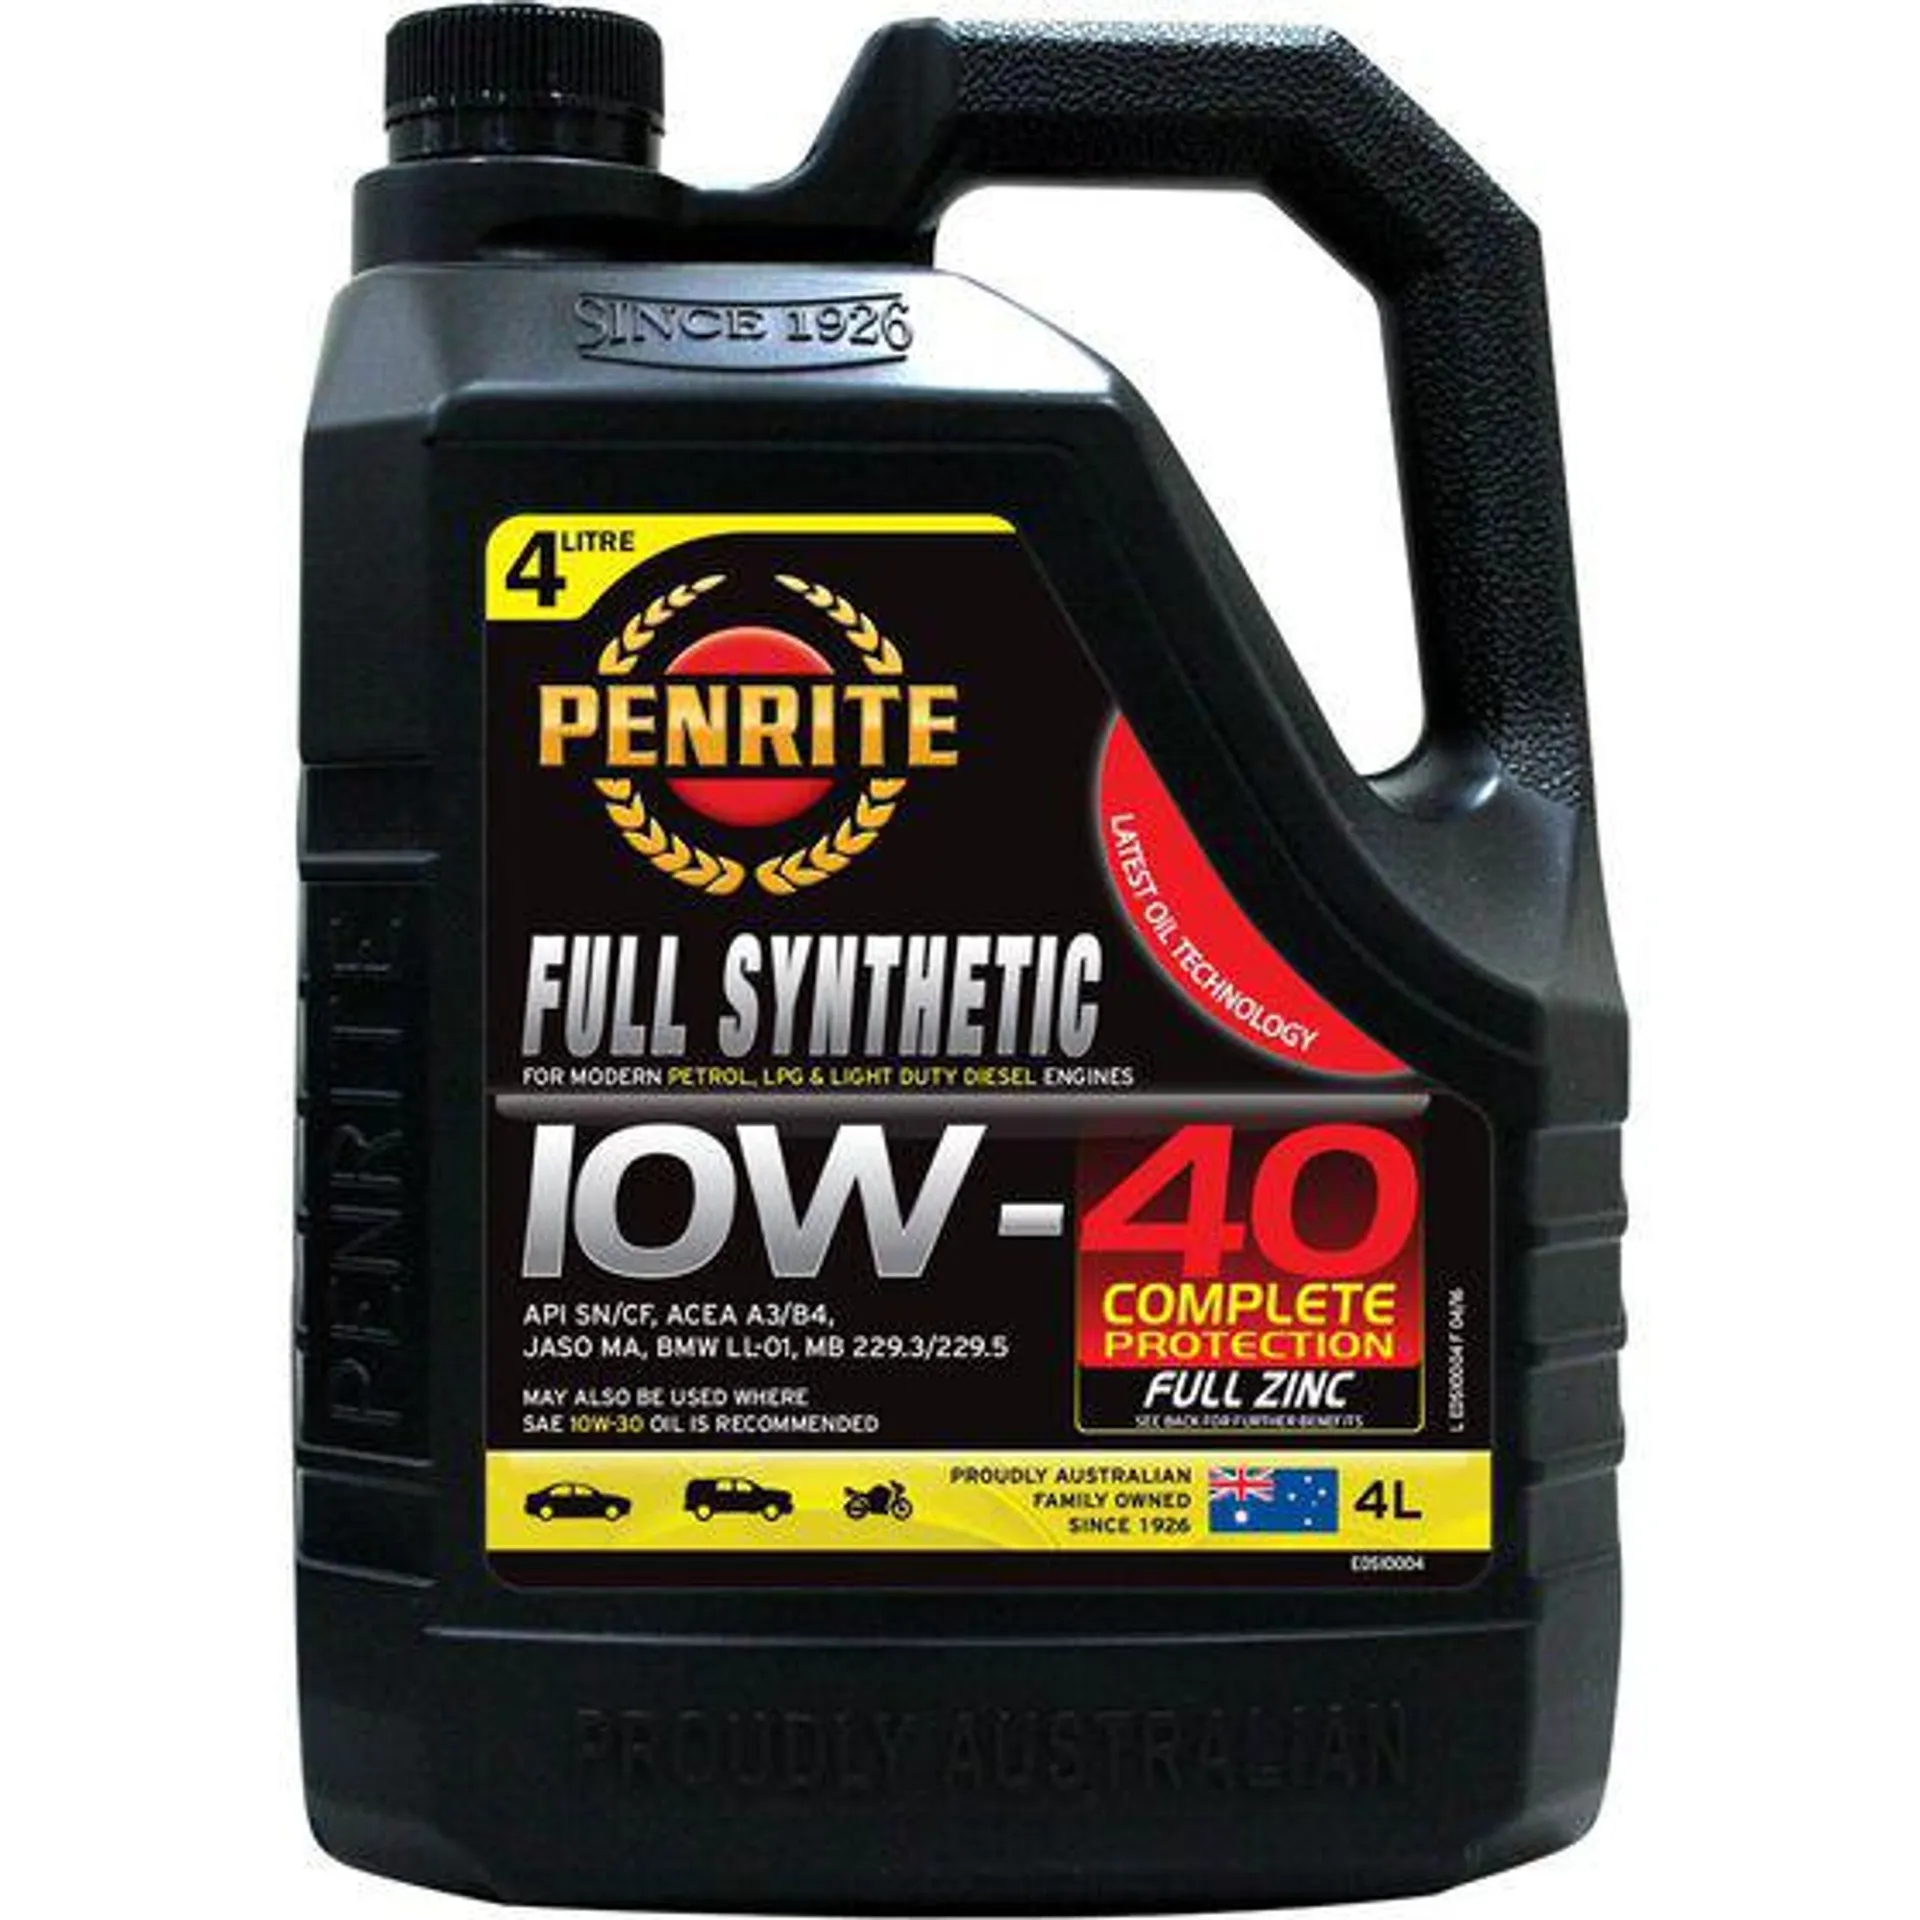 Penrite Full Synthetic Engine Oil - 10W-40 4 Litre